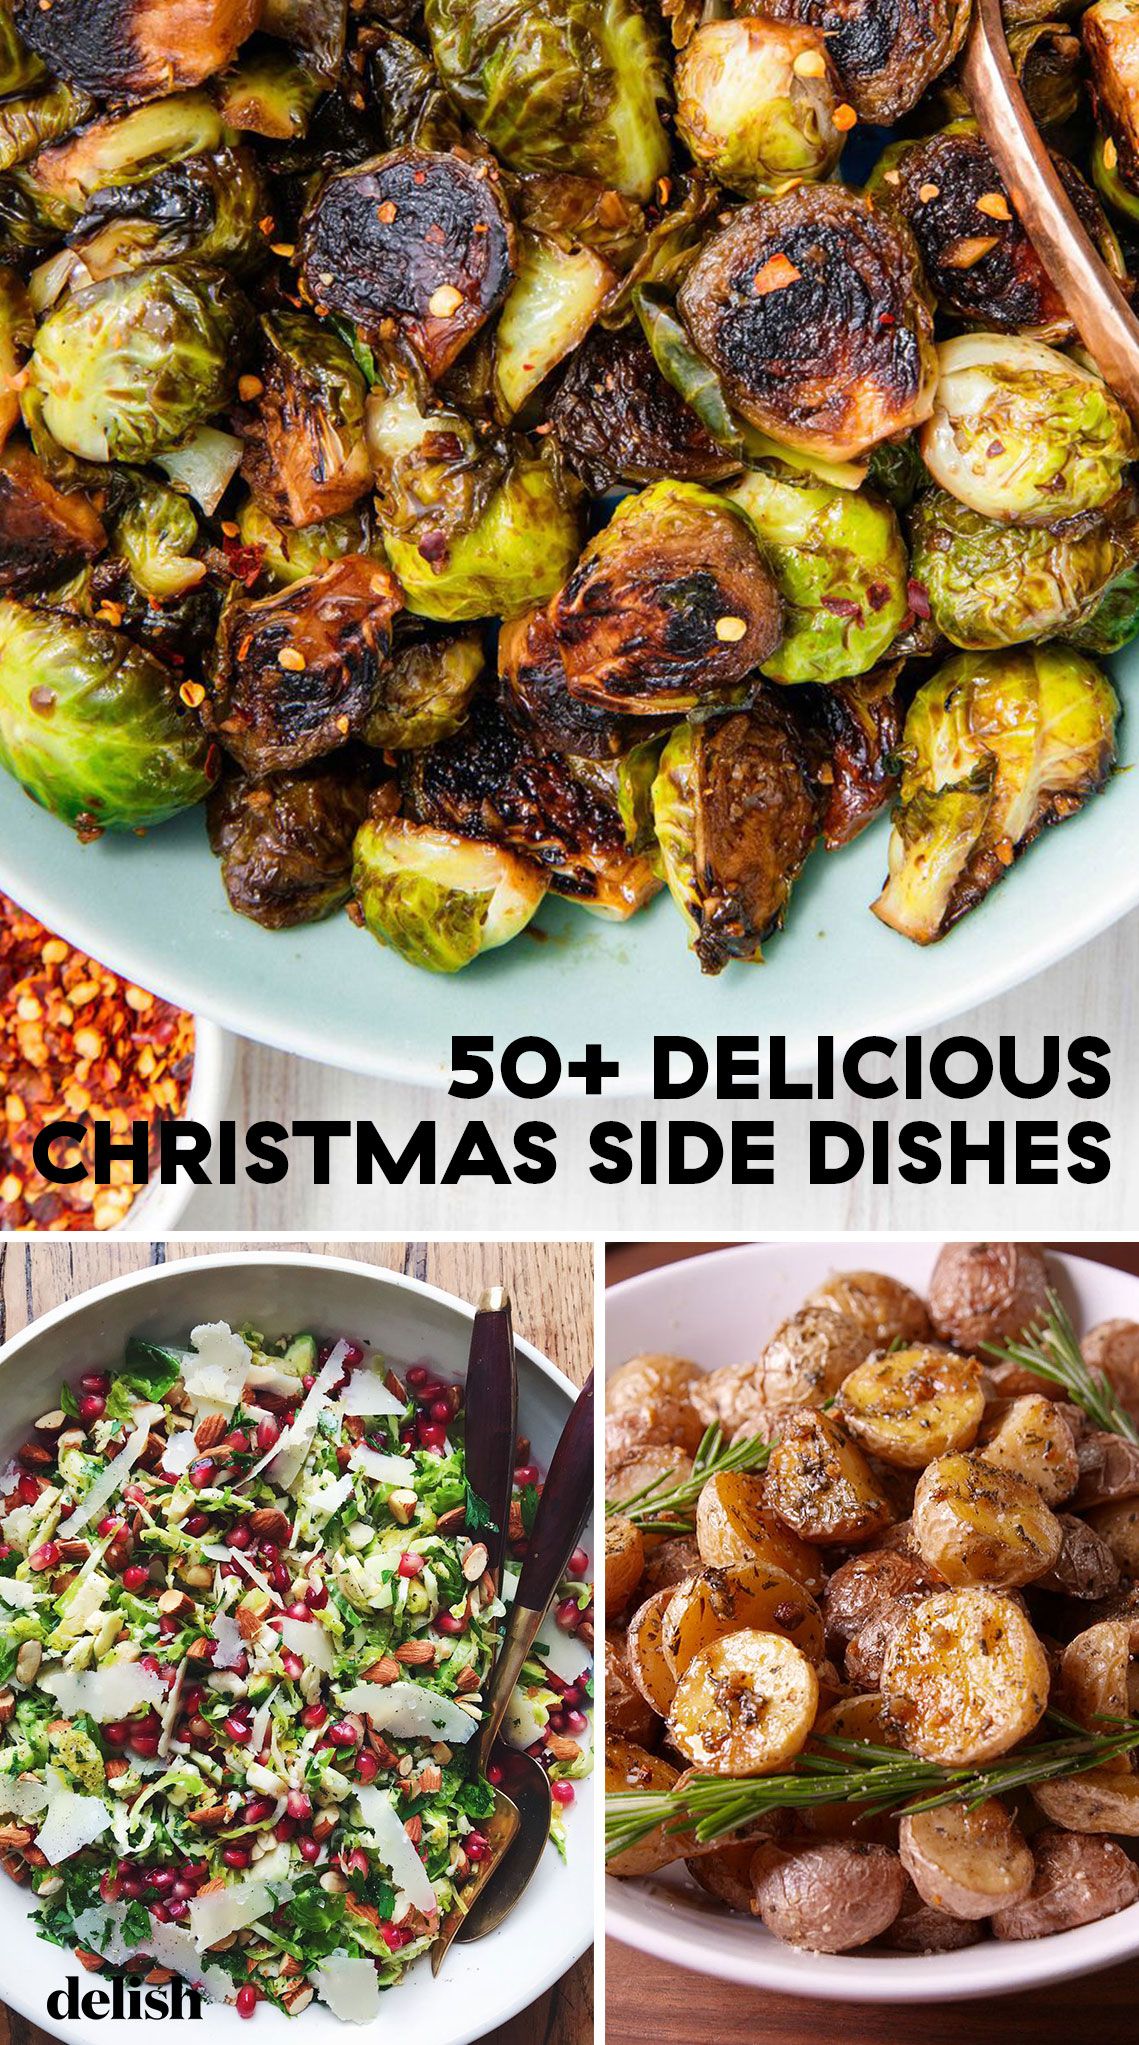 Buy Vegetable Recipes For Christmas Dinner Up To 68 Off